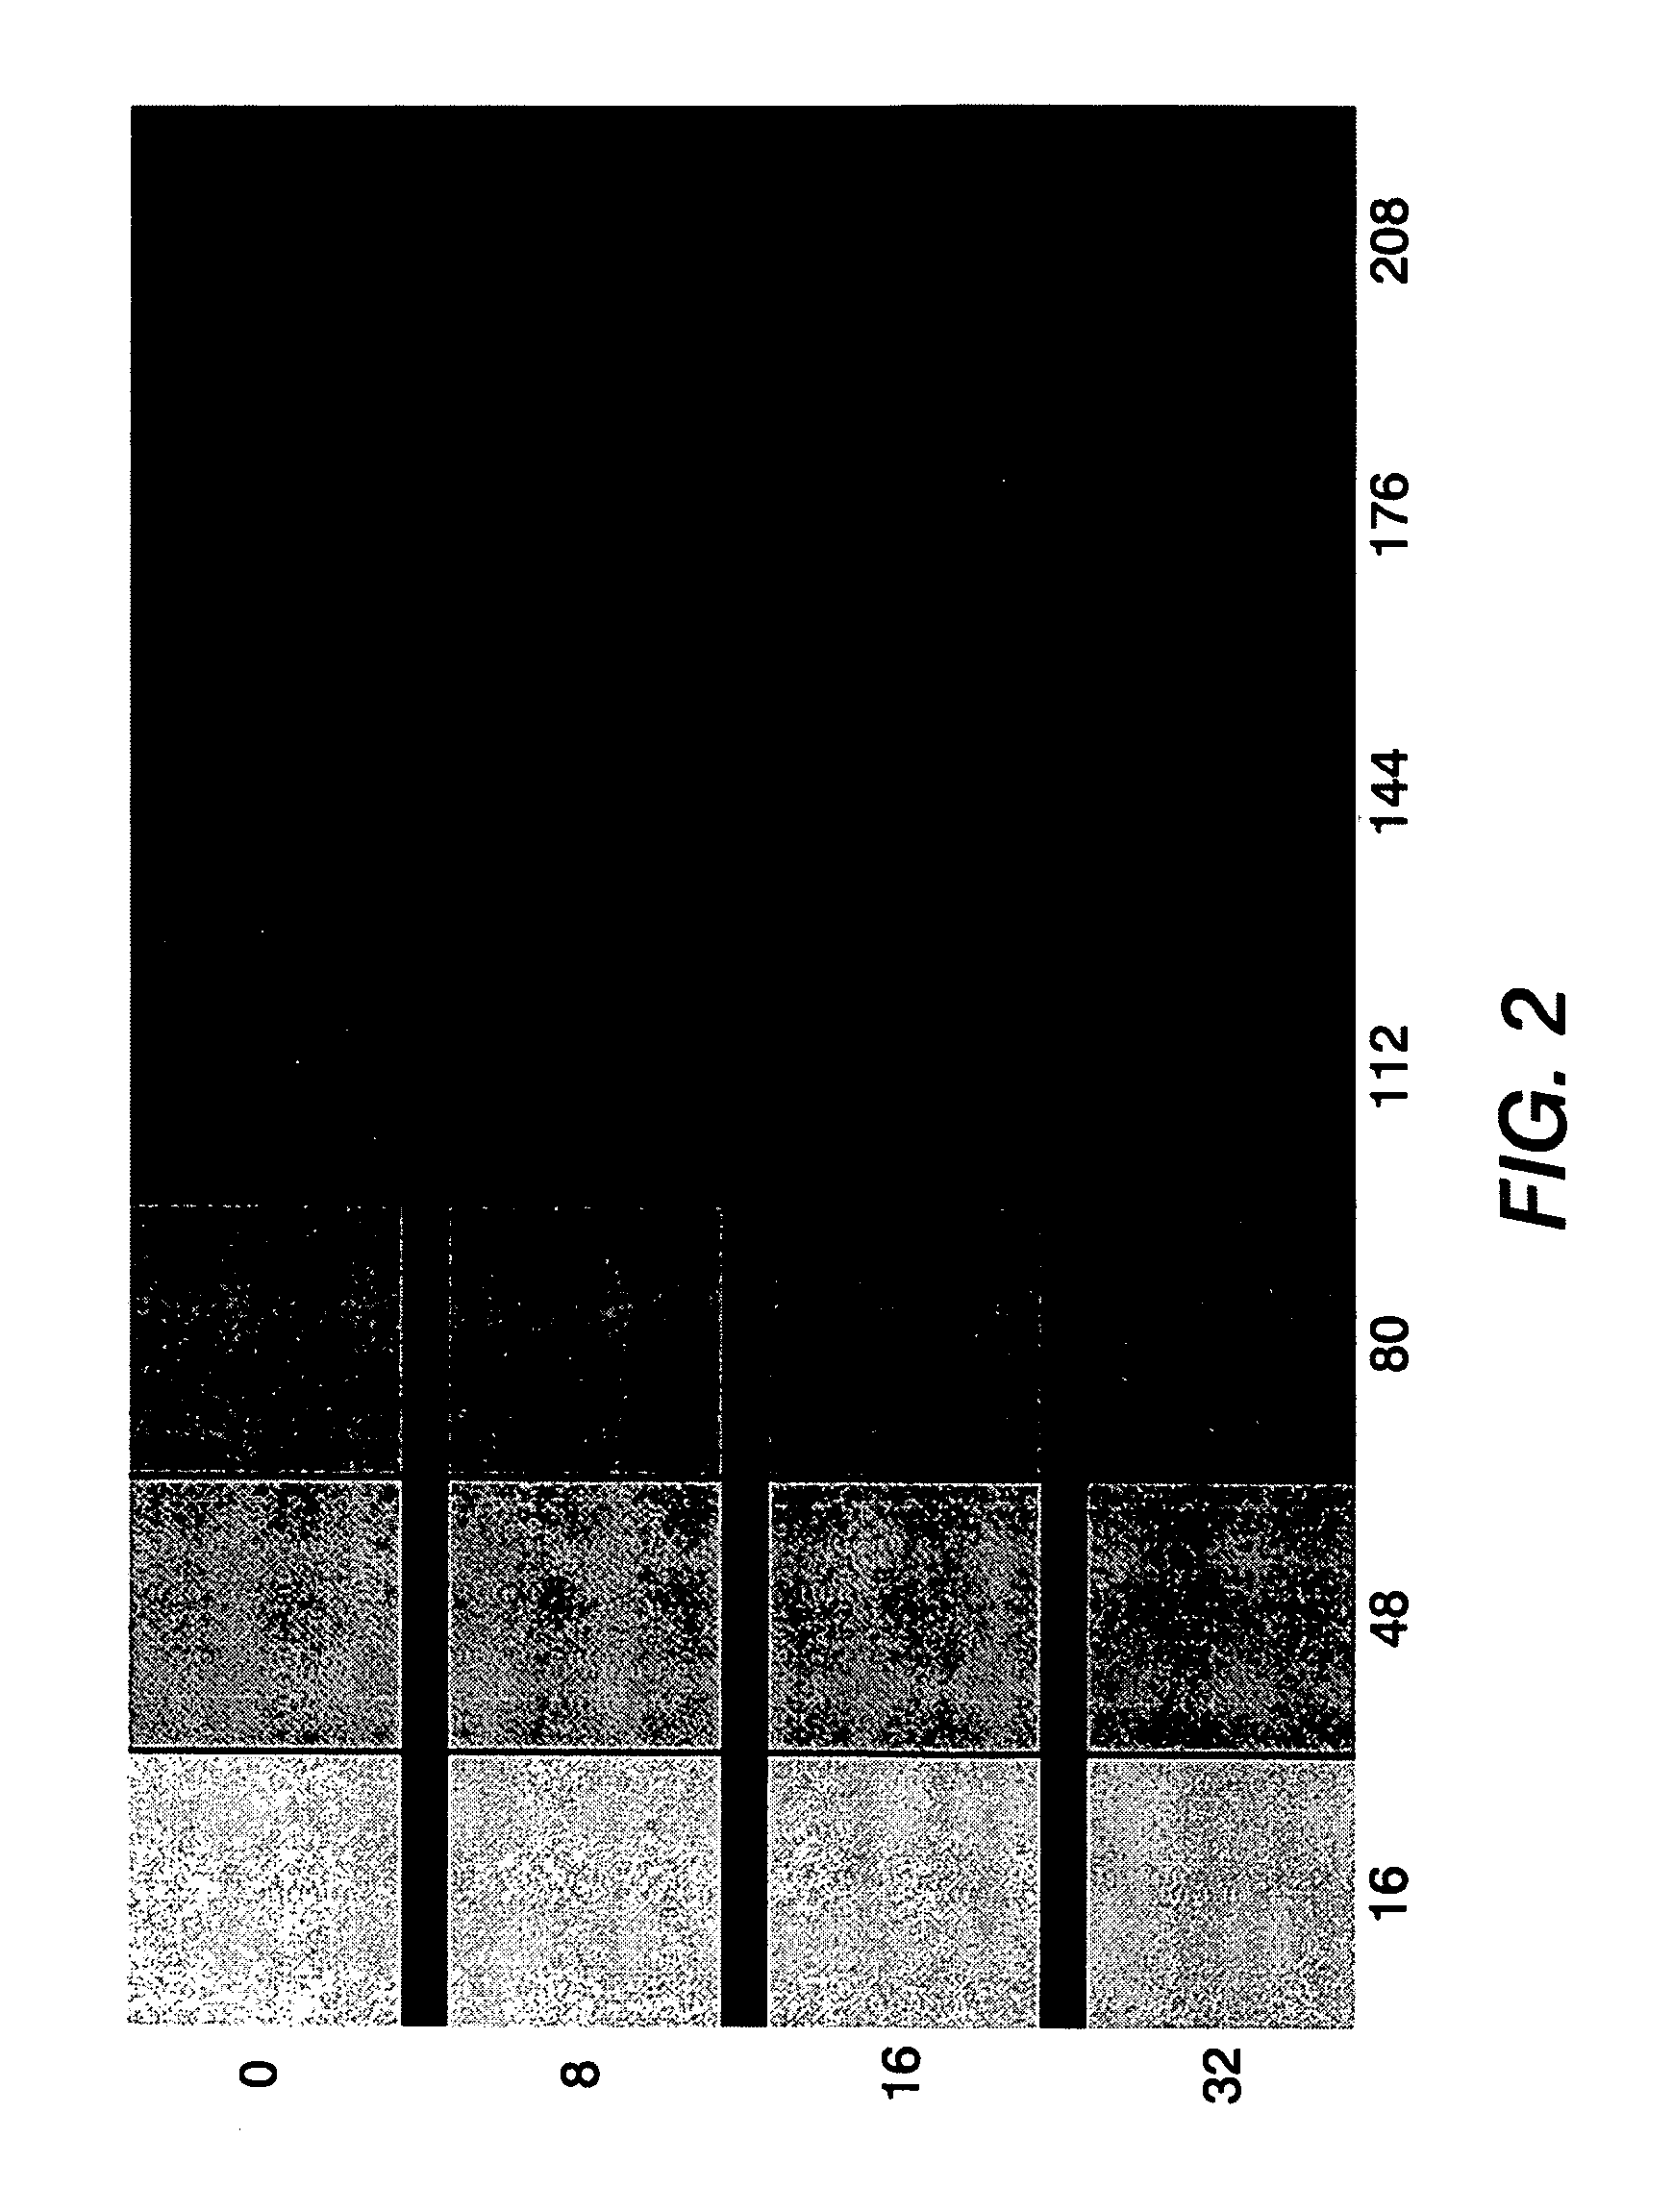 Systems and methods for controlling a tone reproduction curve using error diffusion